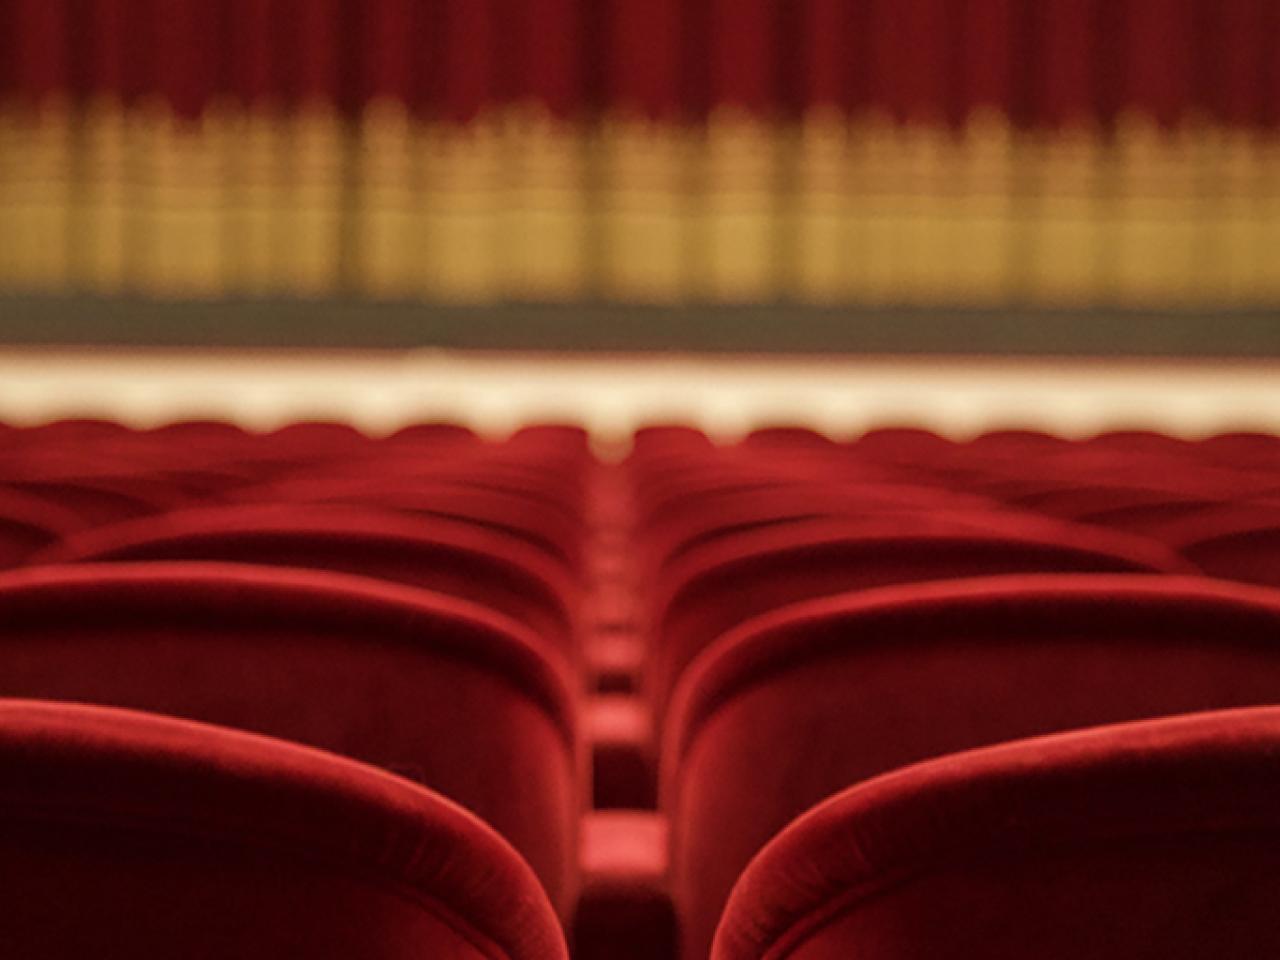 In this empty theater, we see rows of velvet chairs and an out-of-focus stage.